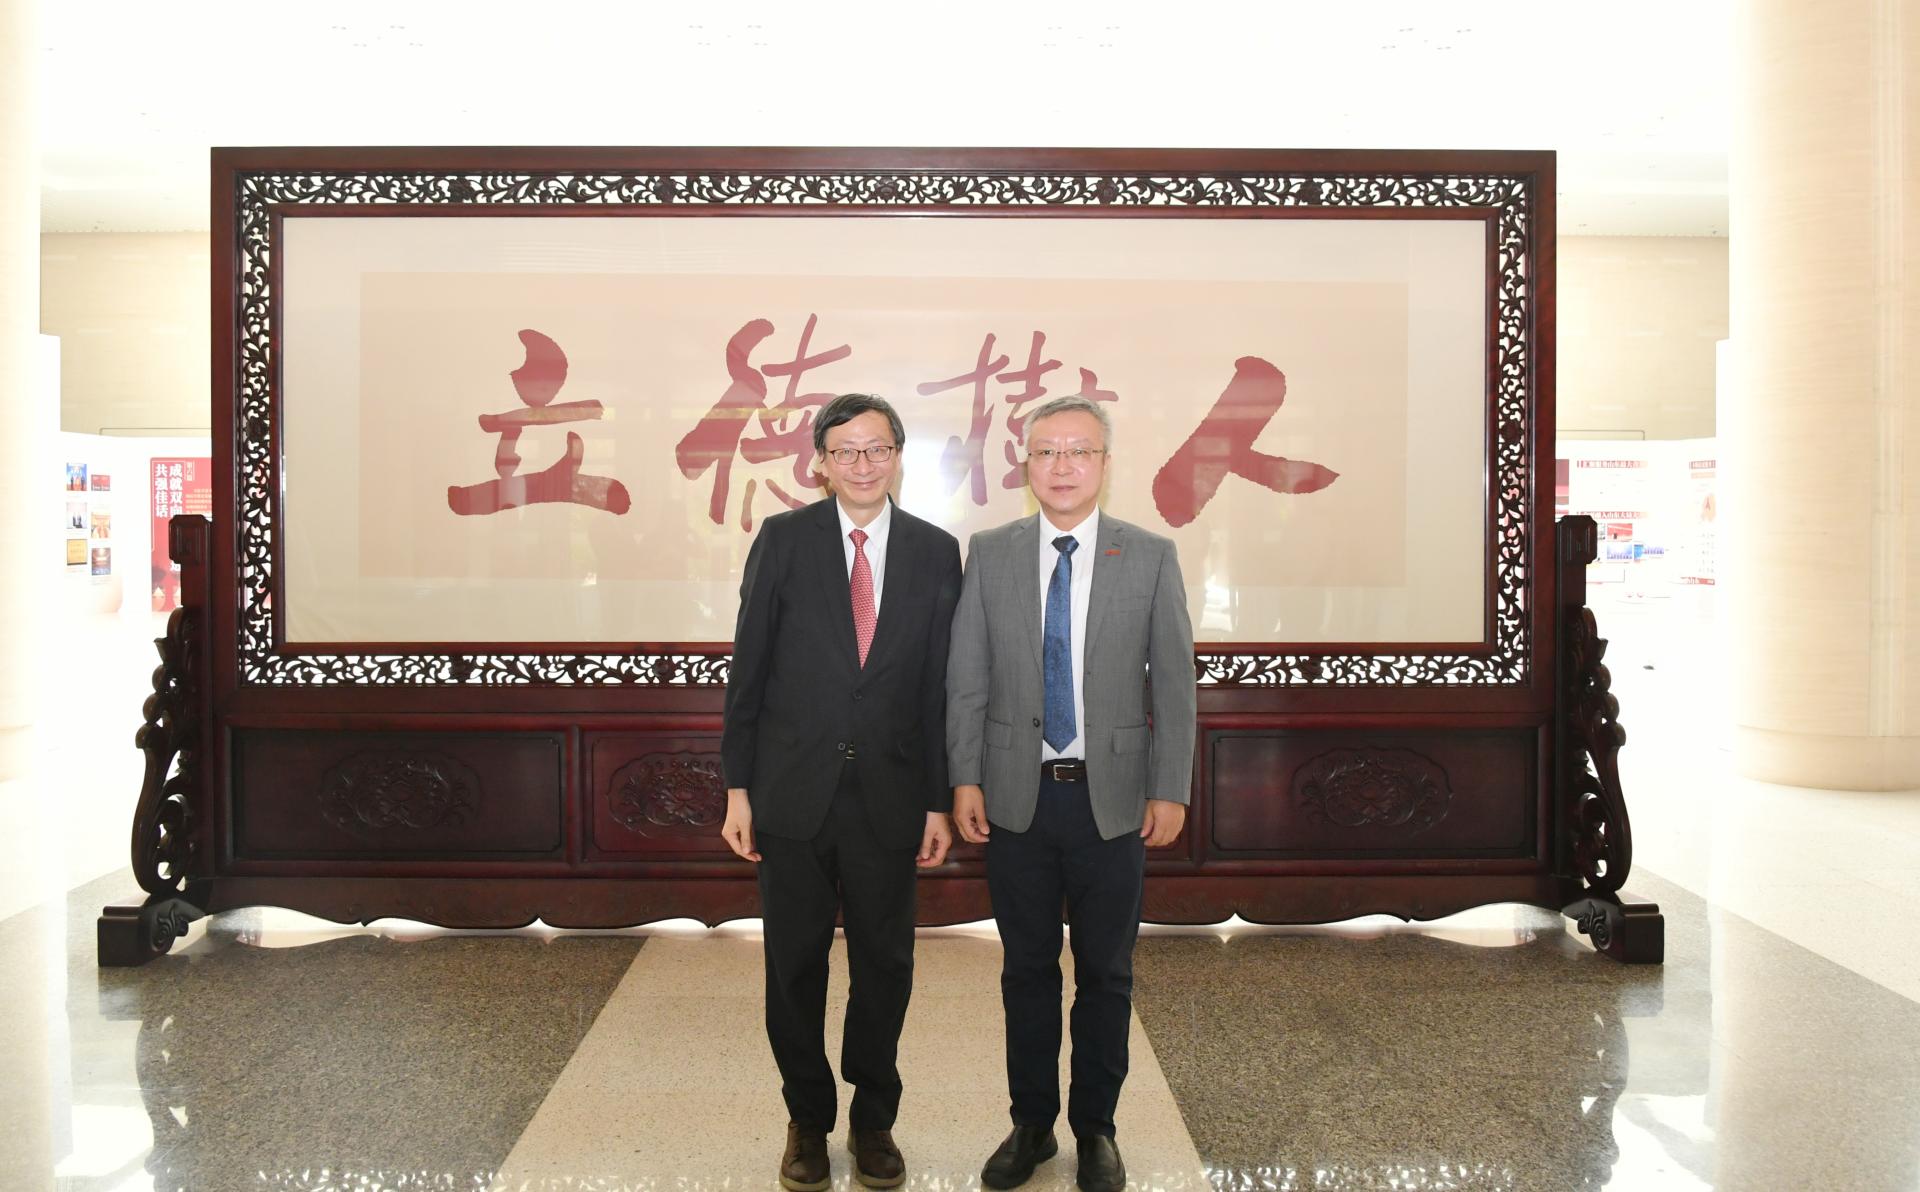 EdUHK Signs MOU with Shandong University Fostering Educational Research Collaboration